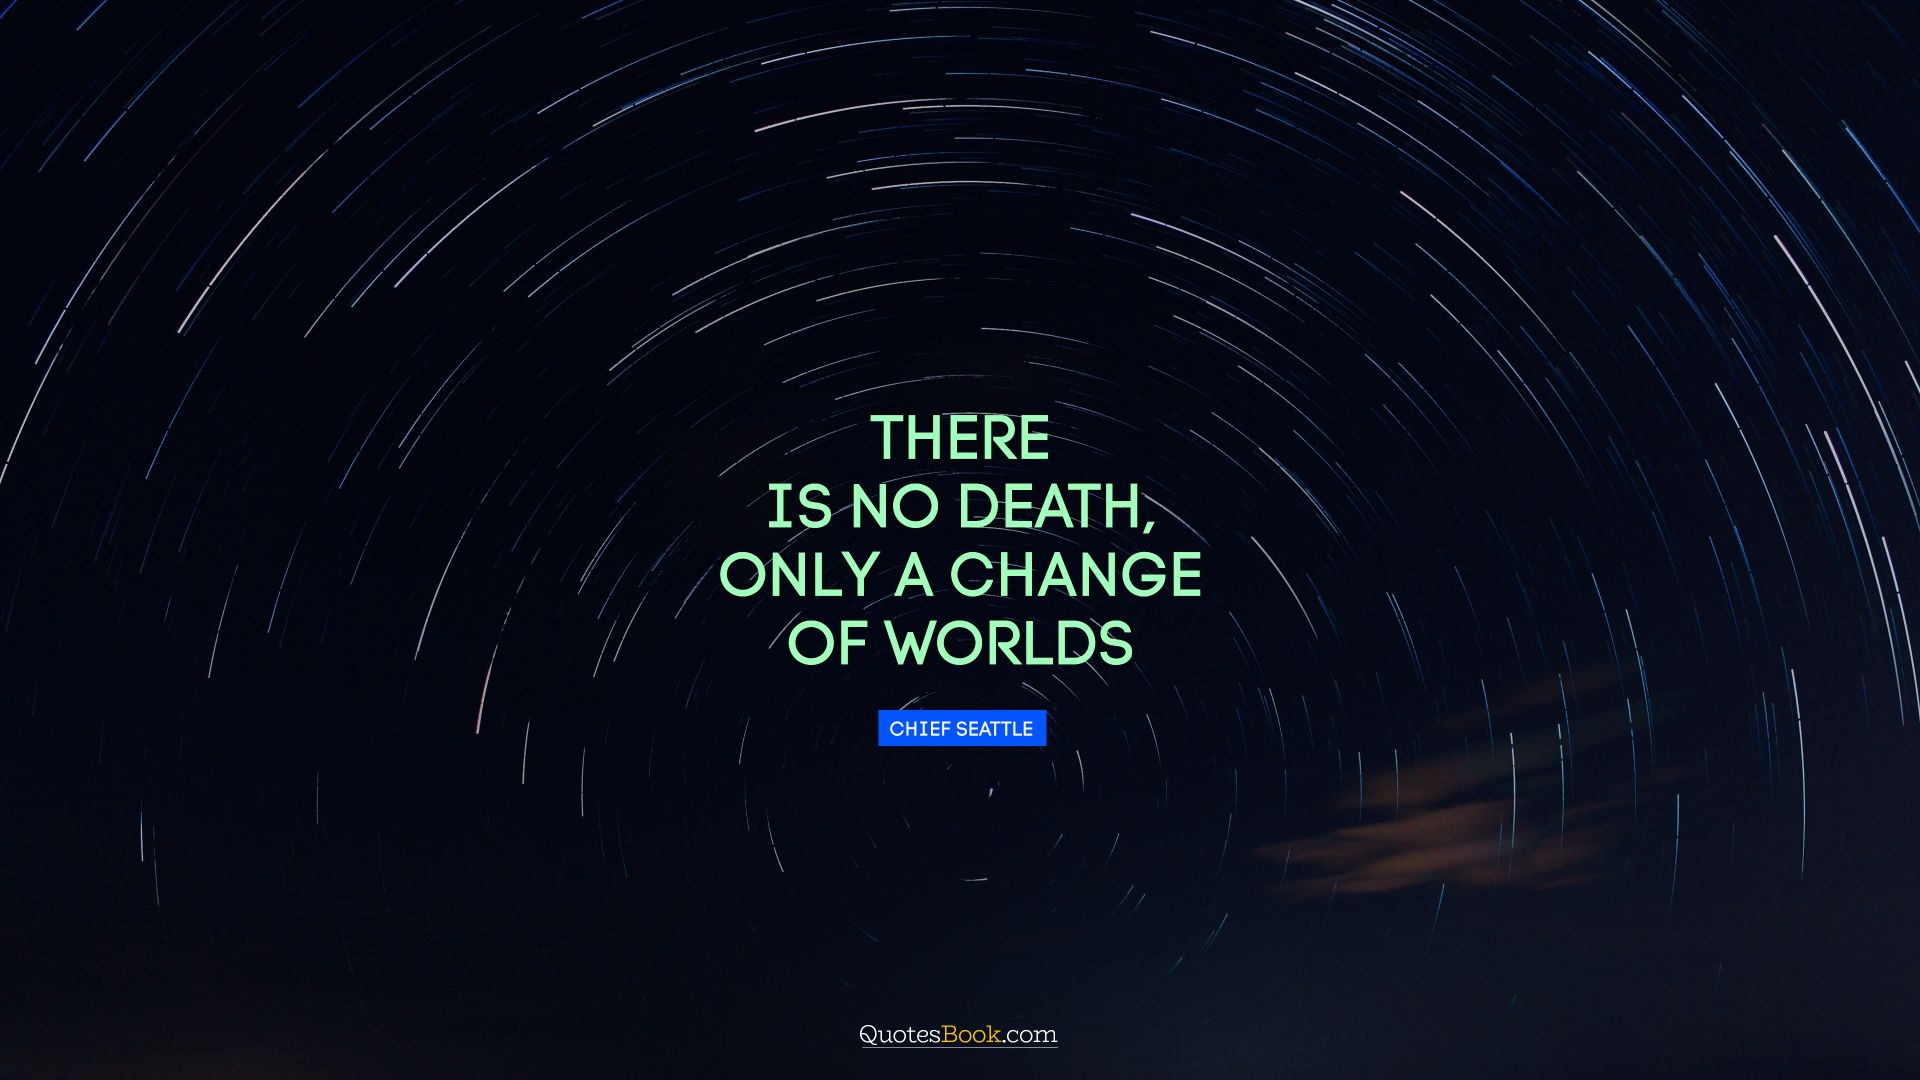 There is no death, only a change of worlds. - Quote by Chief Seattle